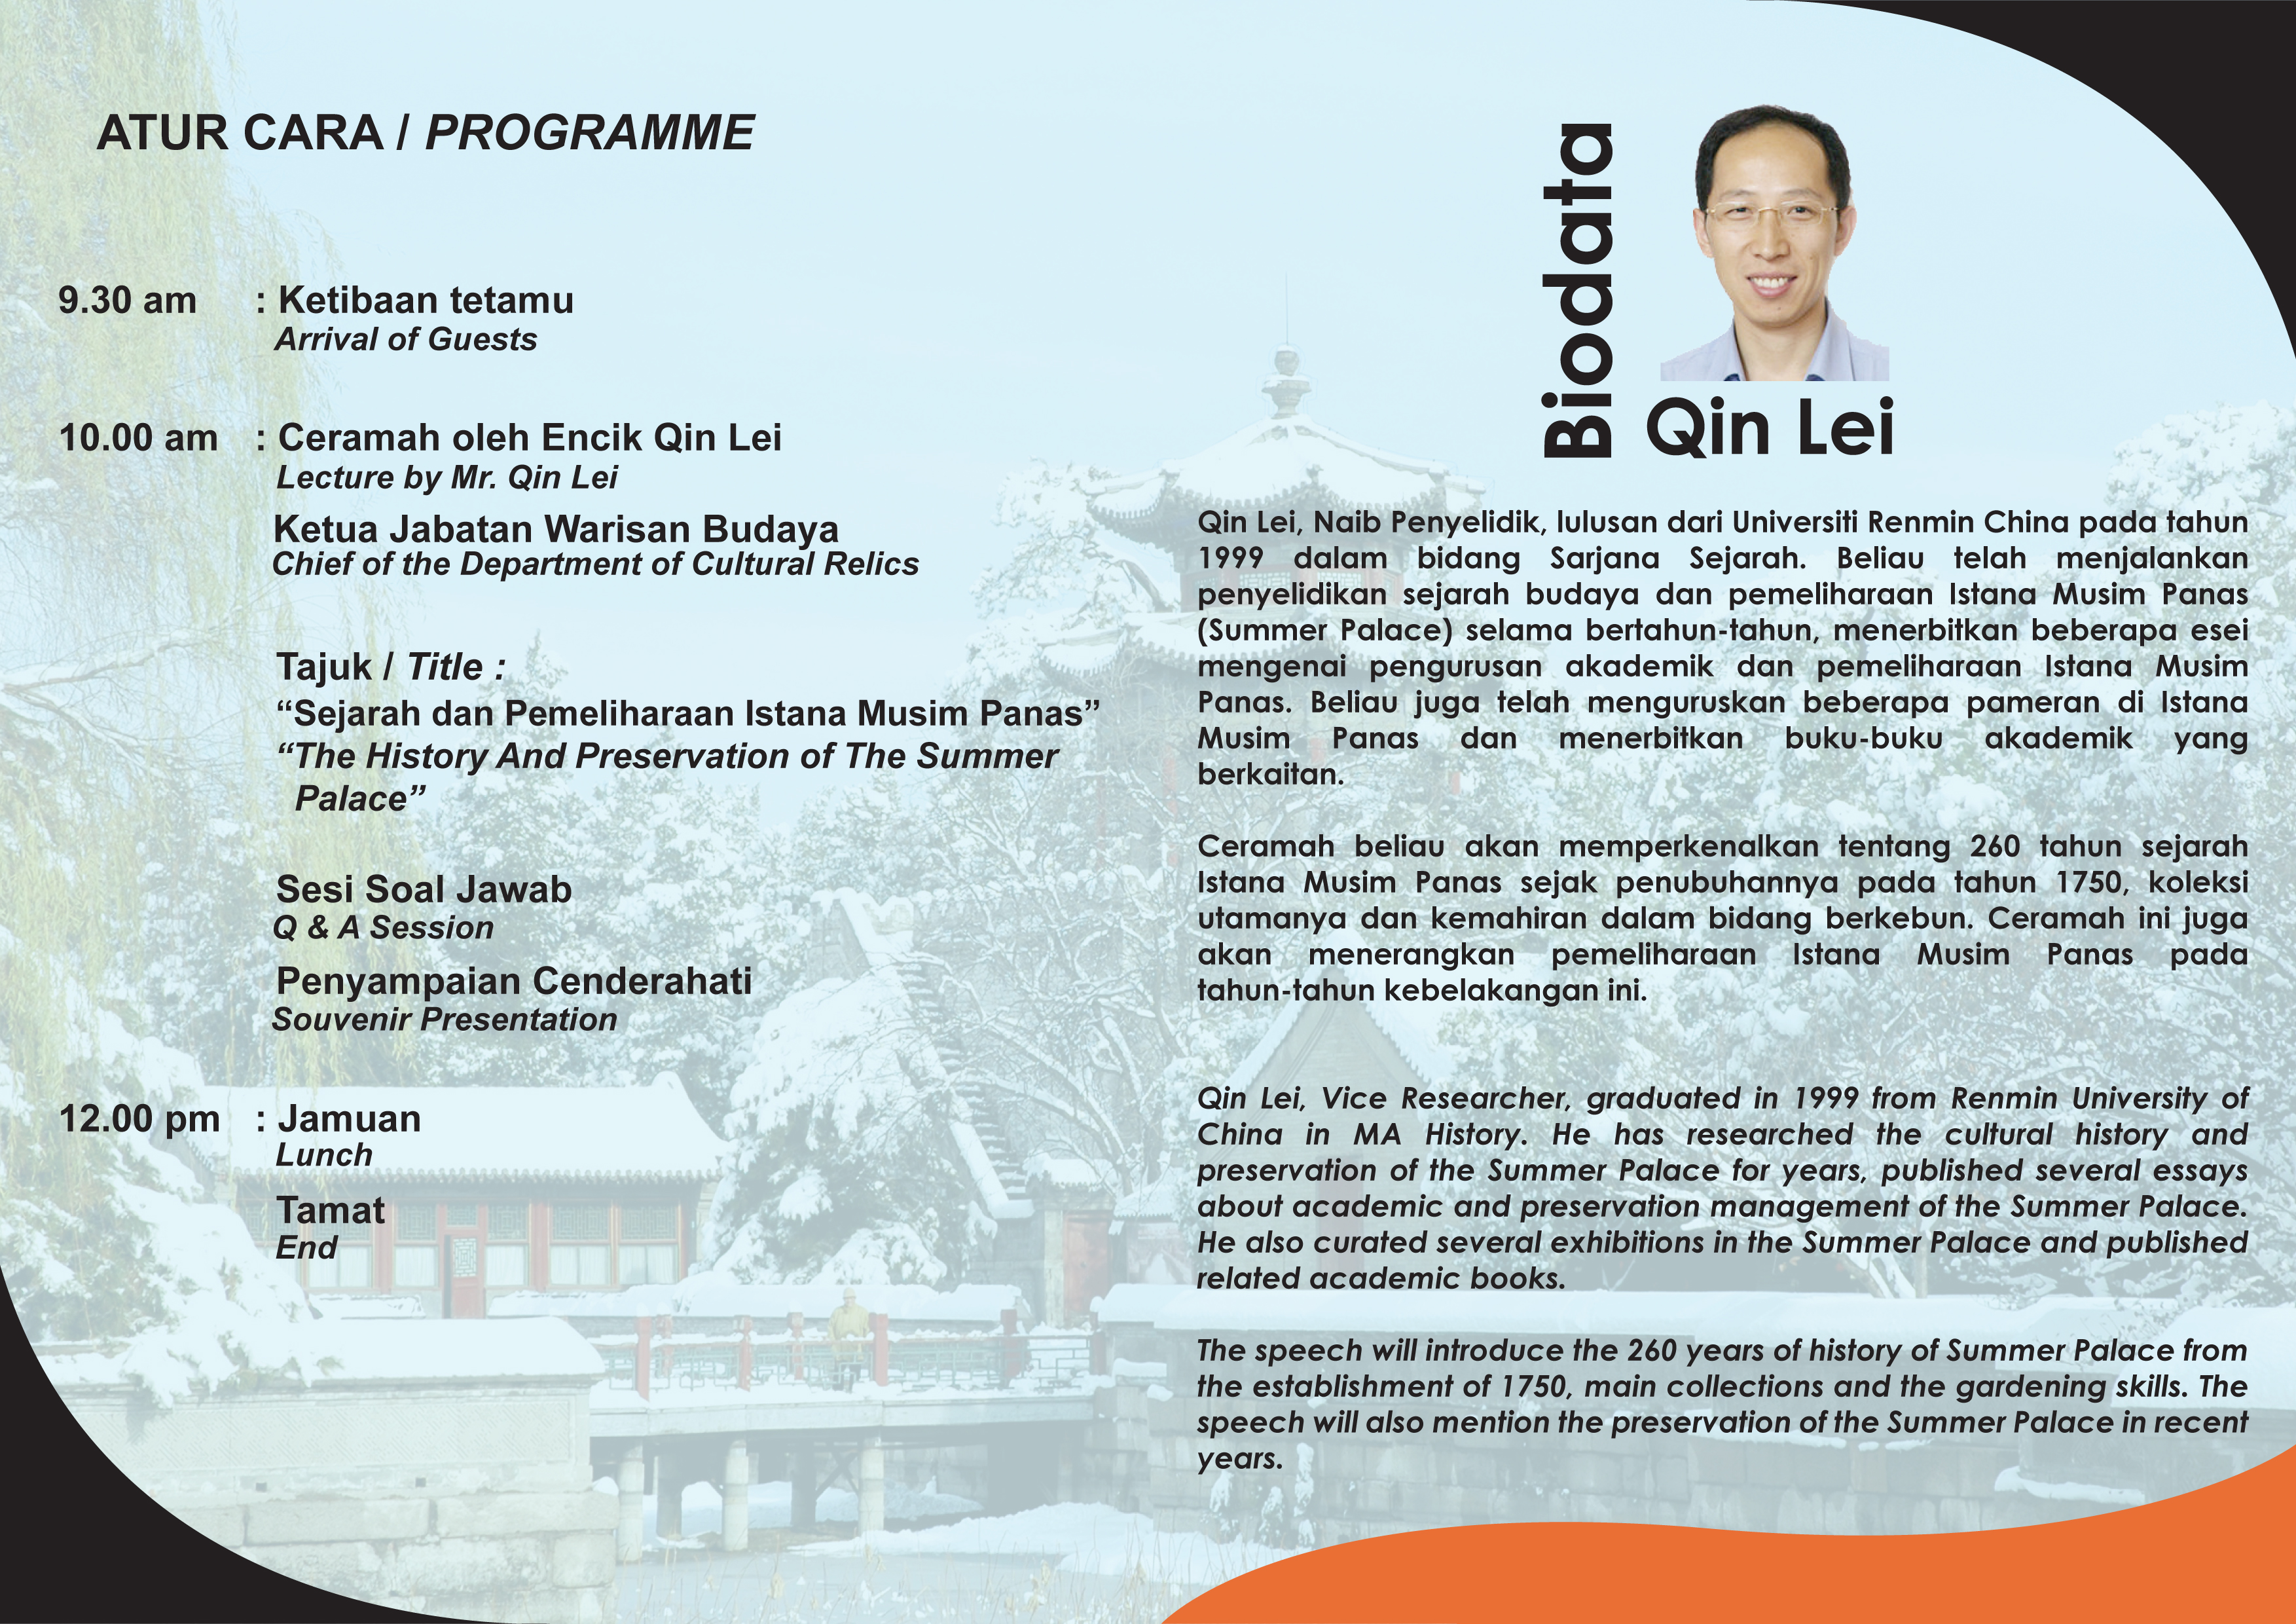 Lecture on : The History And Preservation Of The Summer Palace